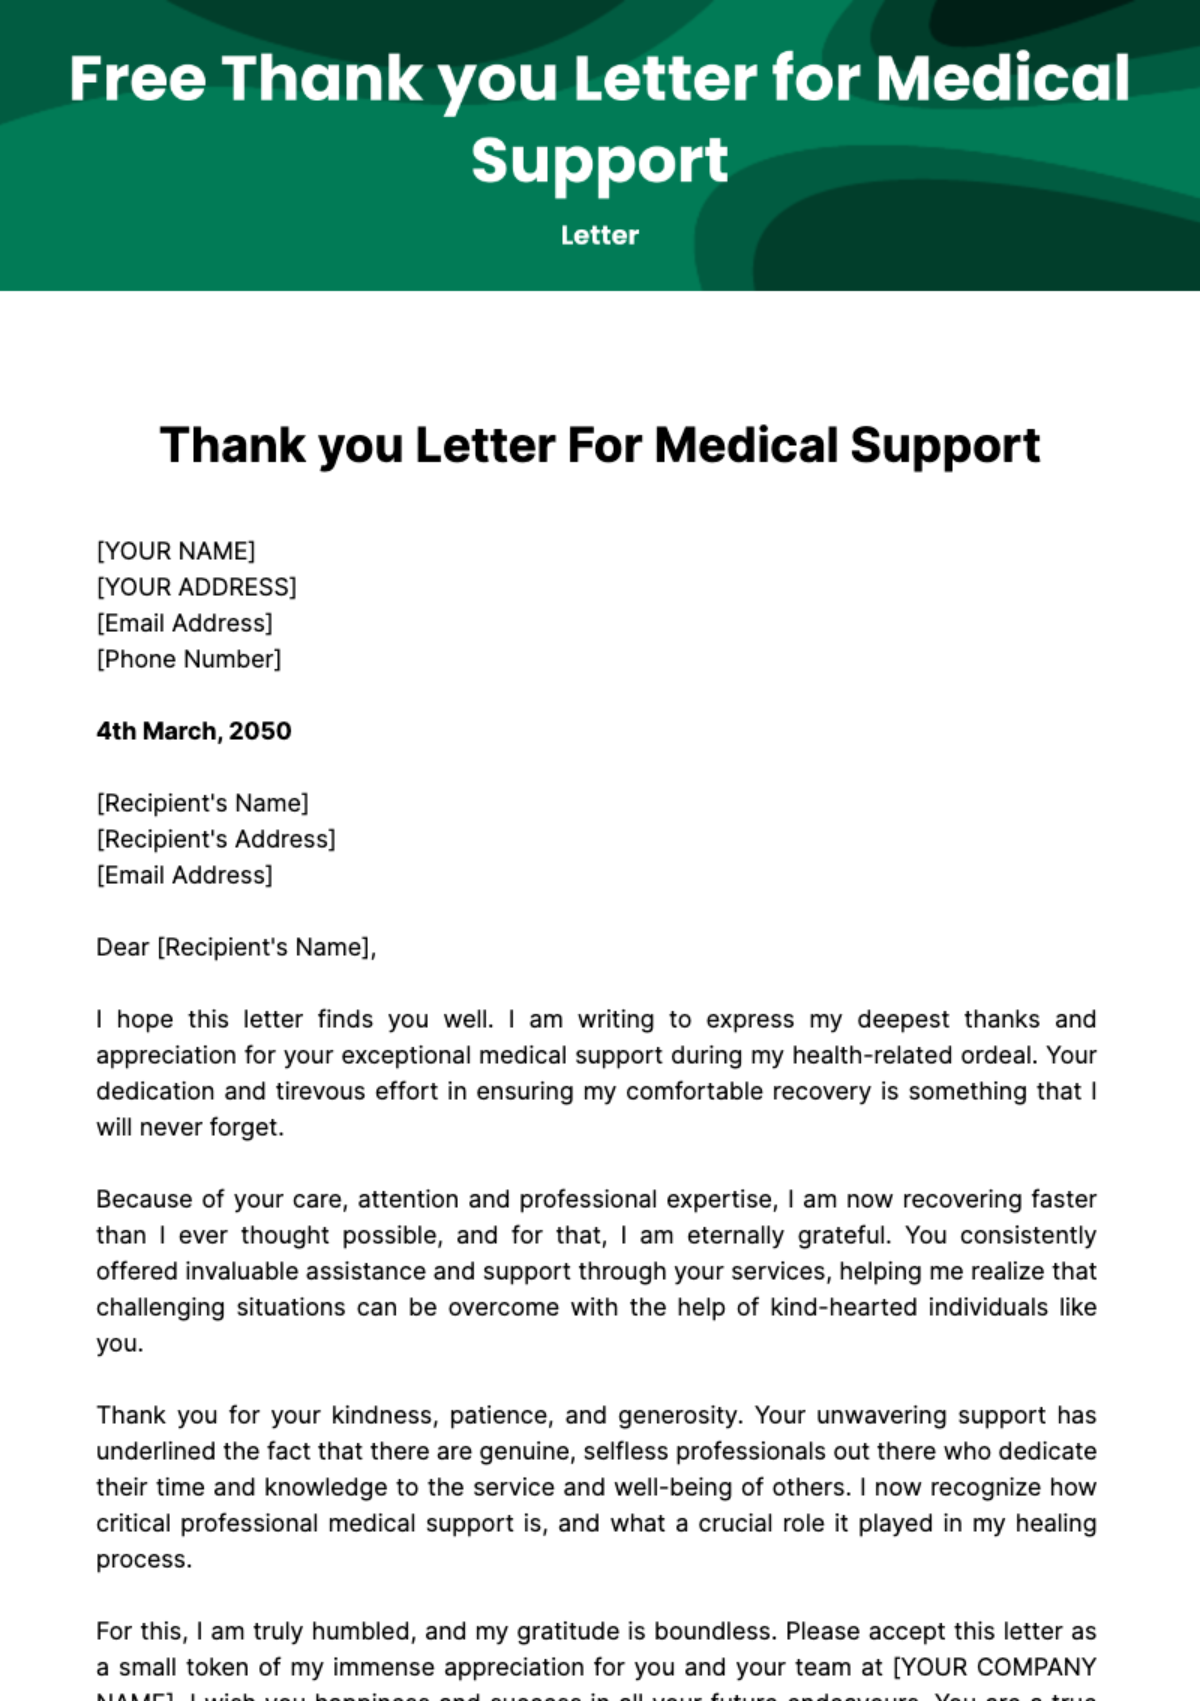 Free Thank you Letter for Medical Support Template